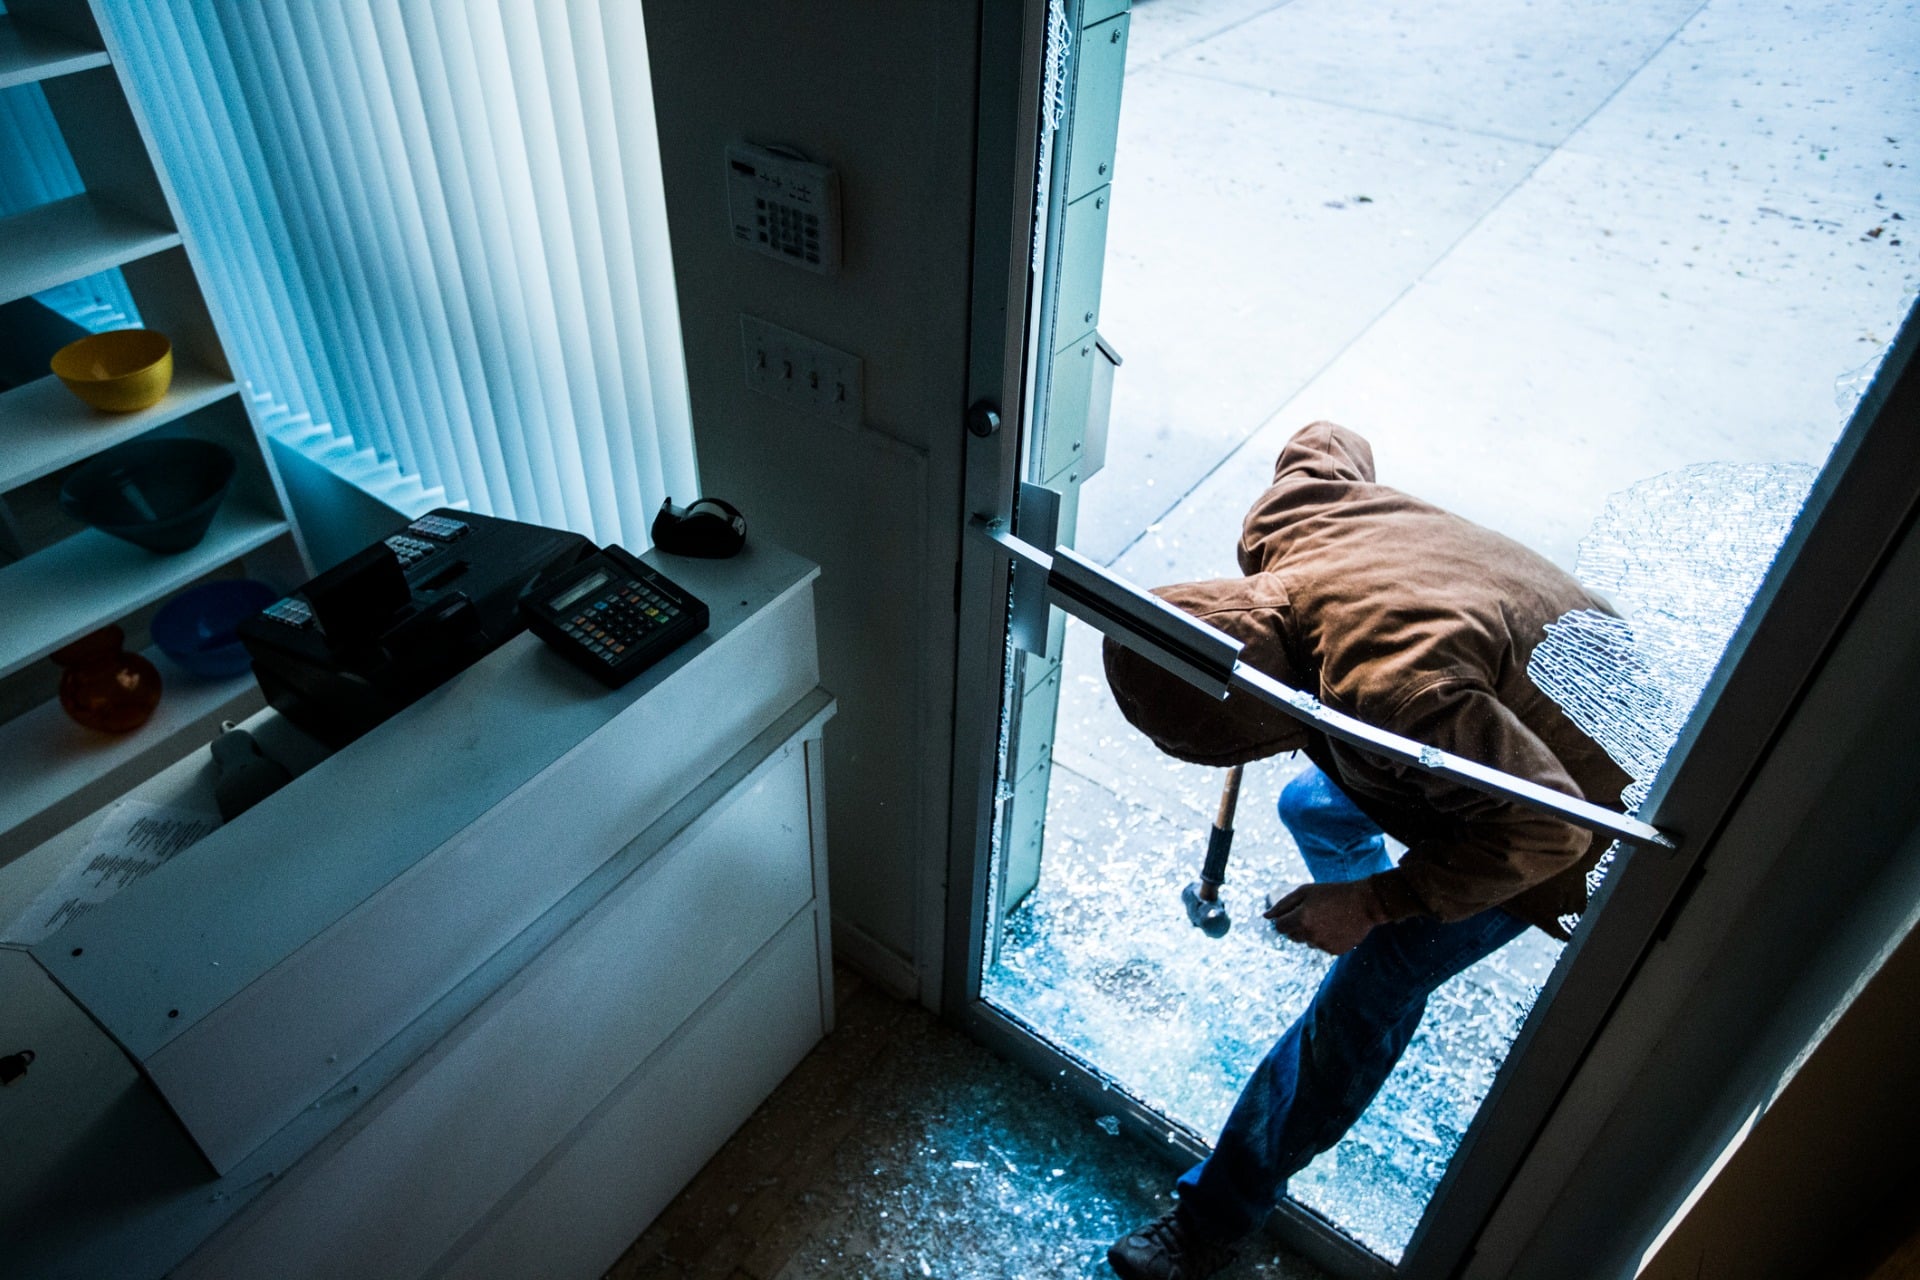 A burglar breaking into a business